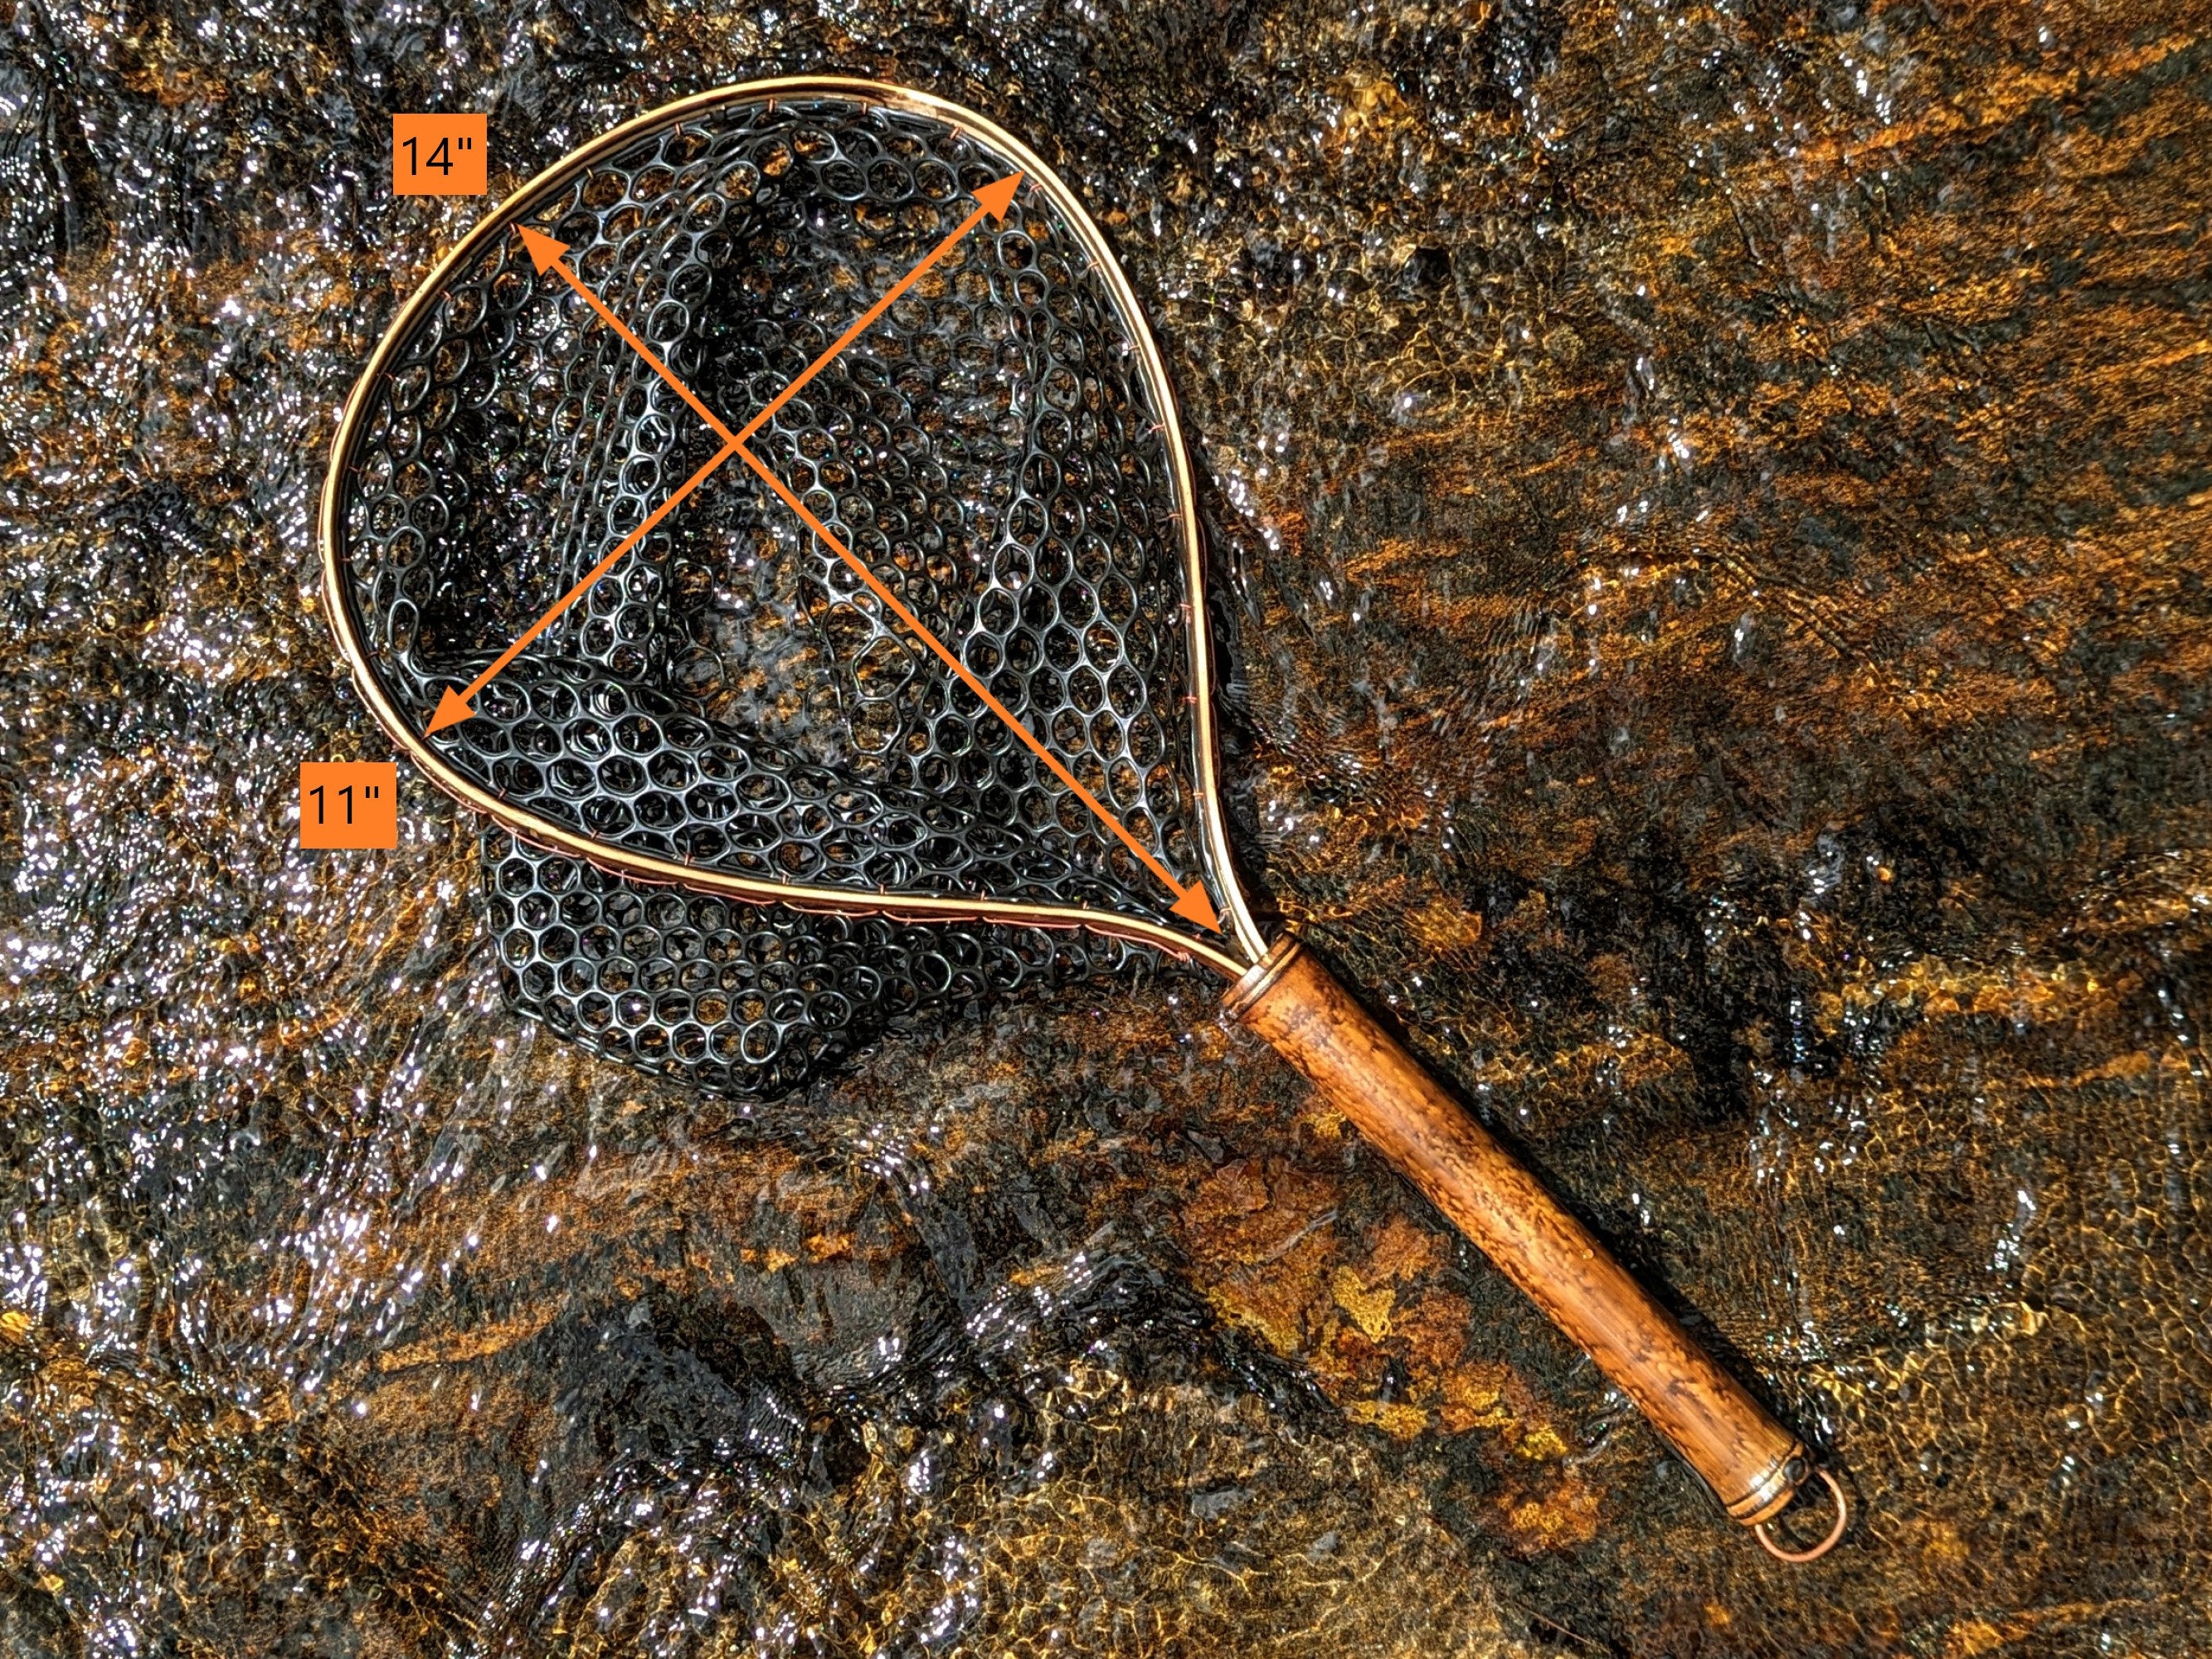 Pocket Water Wide Mouth Landing Net Made in the USA, Small Bamboo